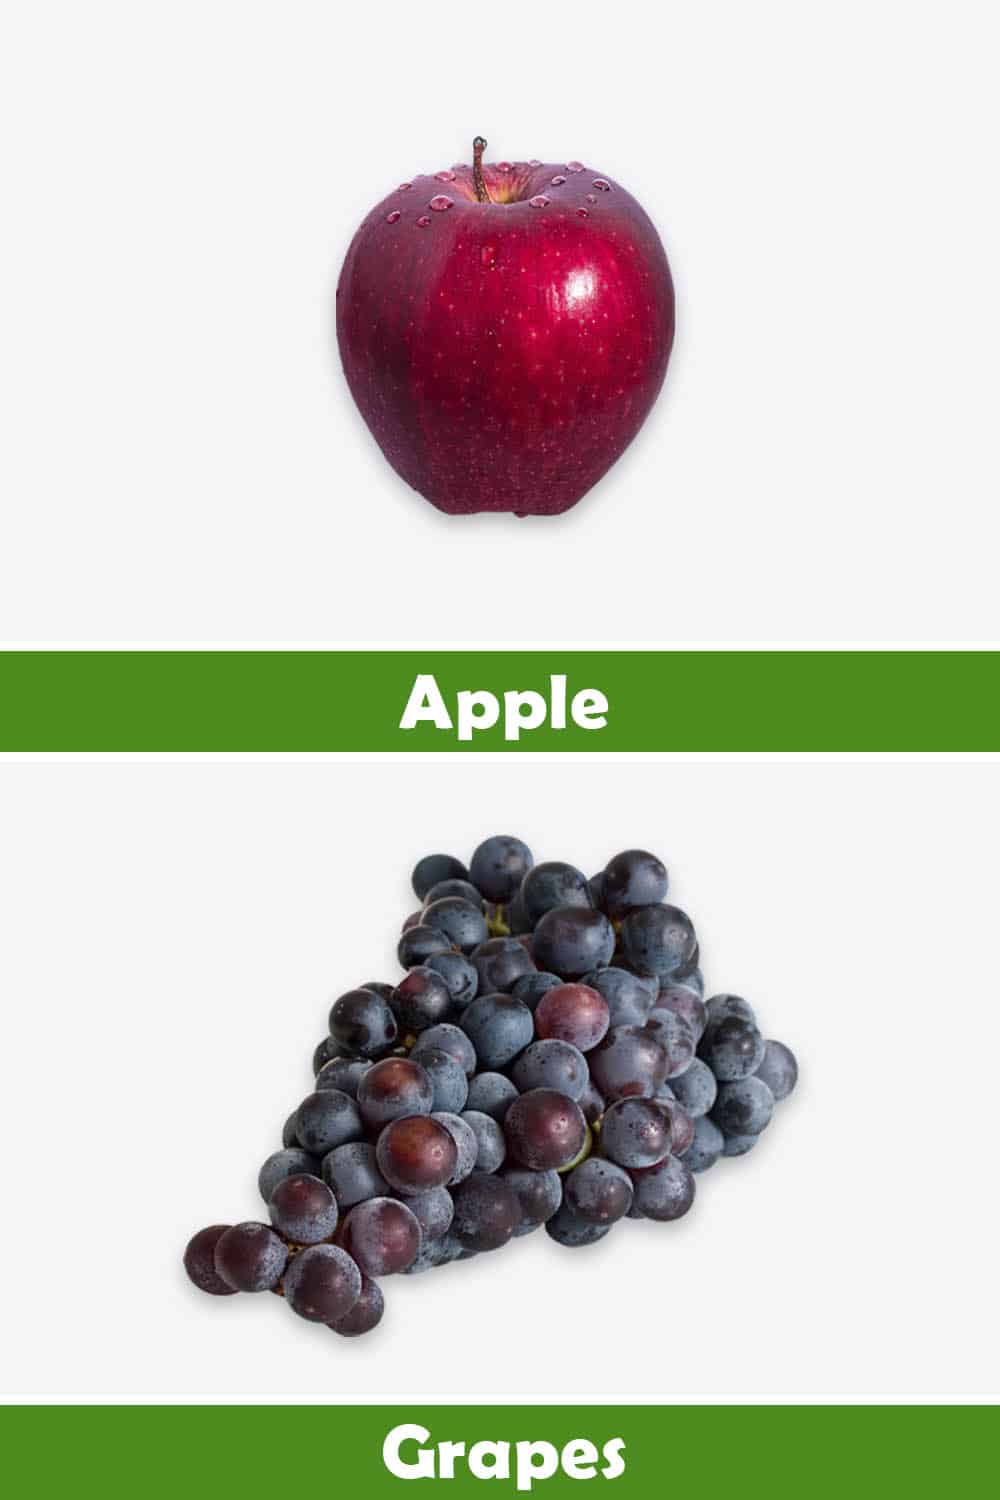 APPLE AND GRAPES